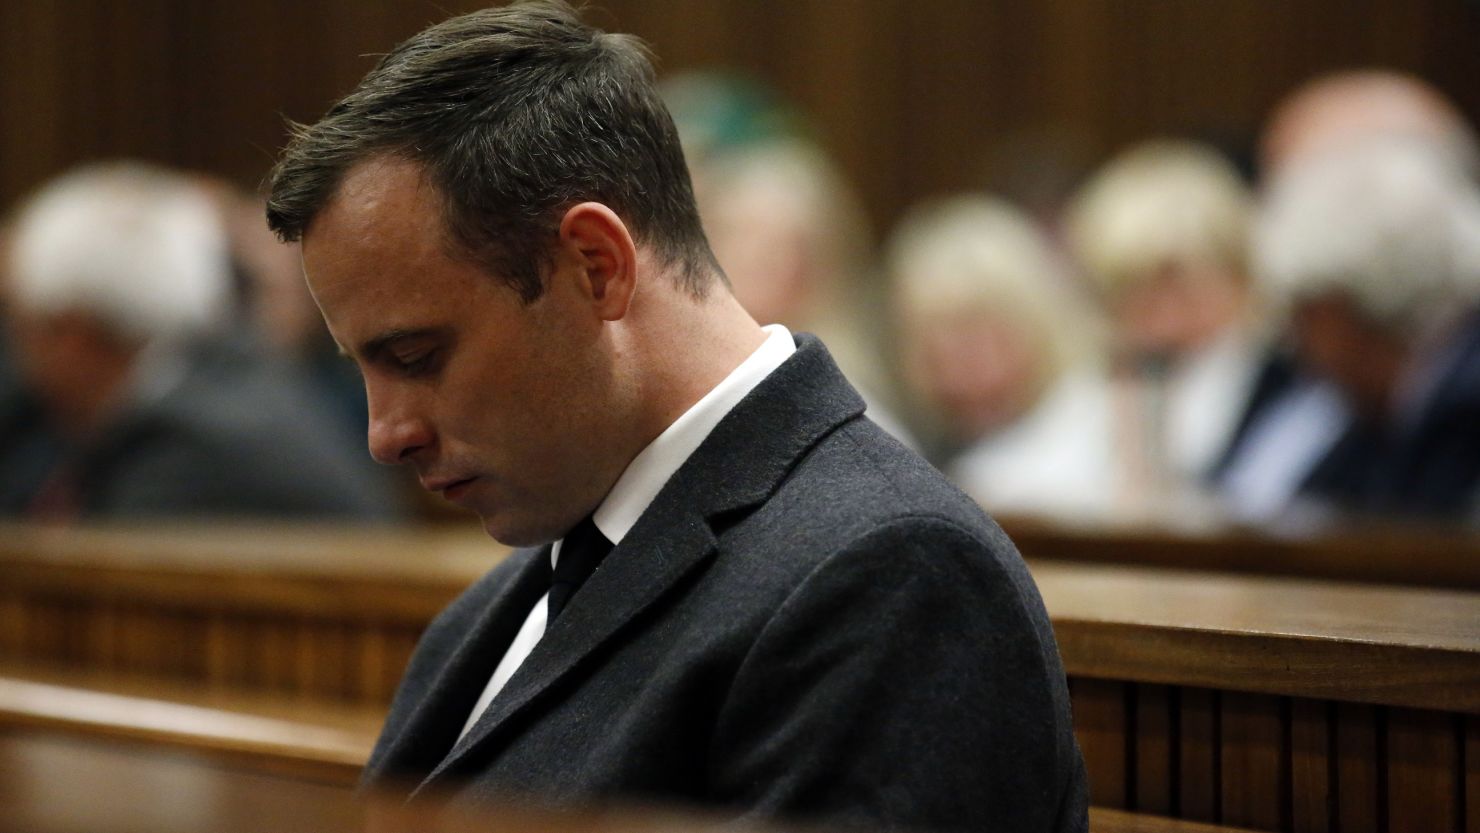 Paralympian athlete Oscar Pistorius (L), accused of the murder of his girlfriend Reeva Steenkamp, looks on during a hearing in his murder trial on July 6, 2016 at the High Court in Pretoria, South Africa. 